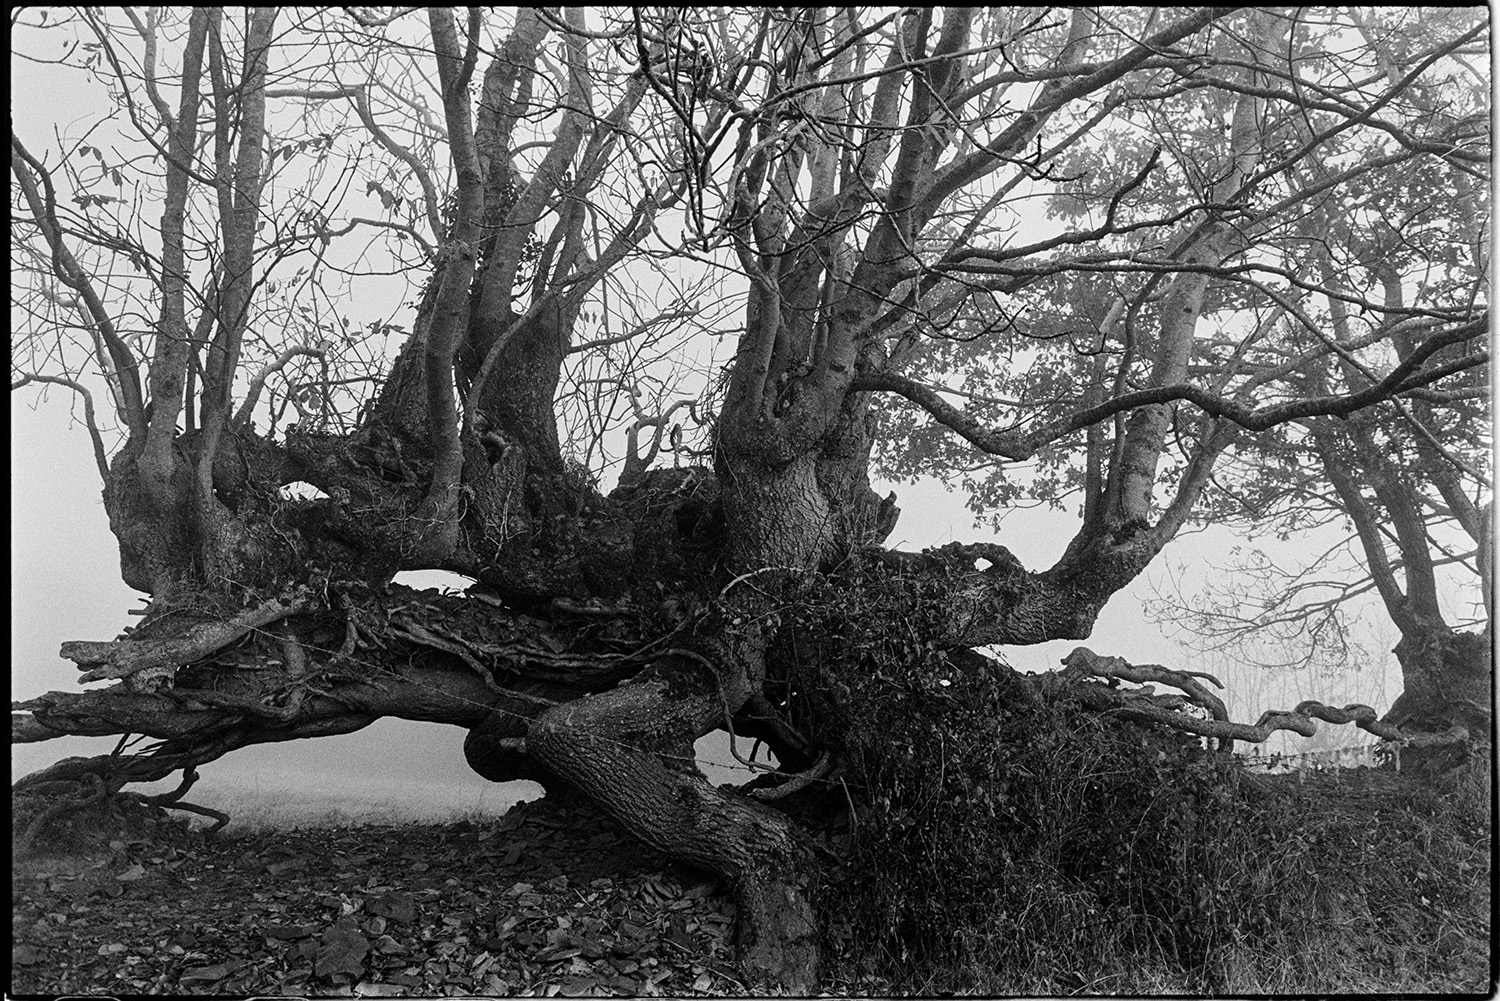 Misty, but very boring views details of old hedge. 
[Gnarled roots and branches of a tree in an old hedgerow near Chulmleigh.]